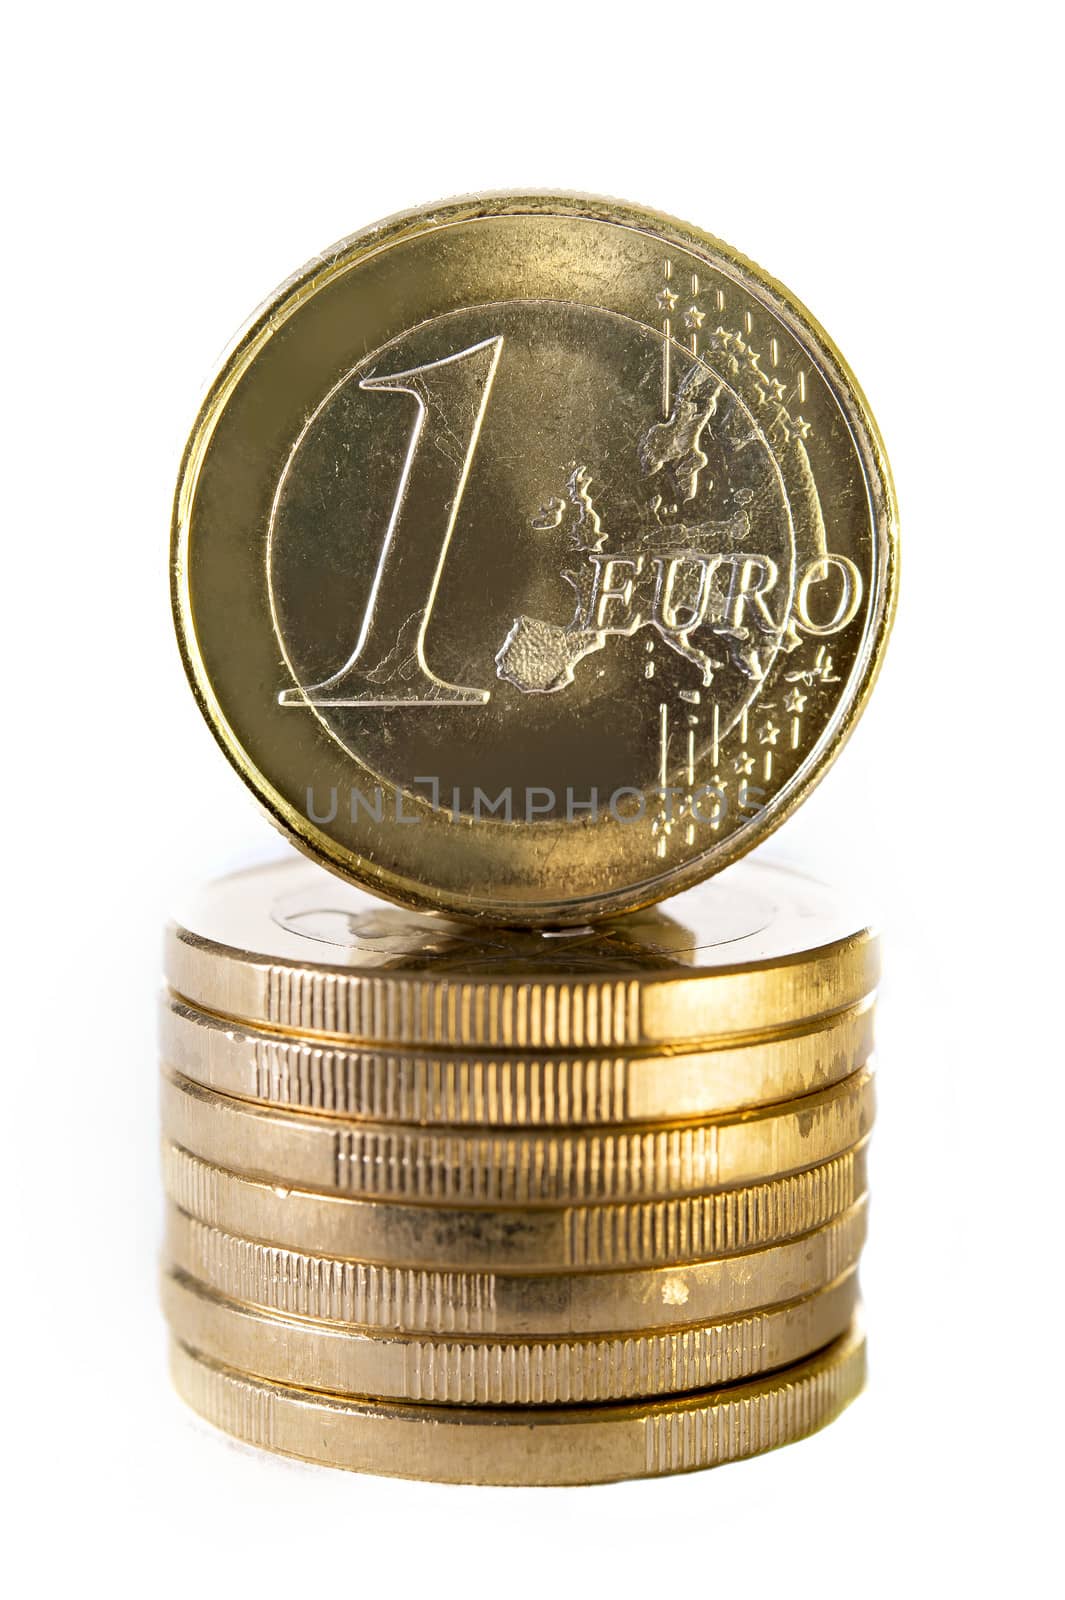 A stack of one Euro coins with one facing towards the camera isolated on white background